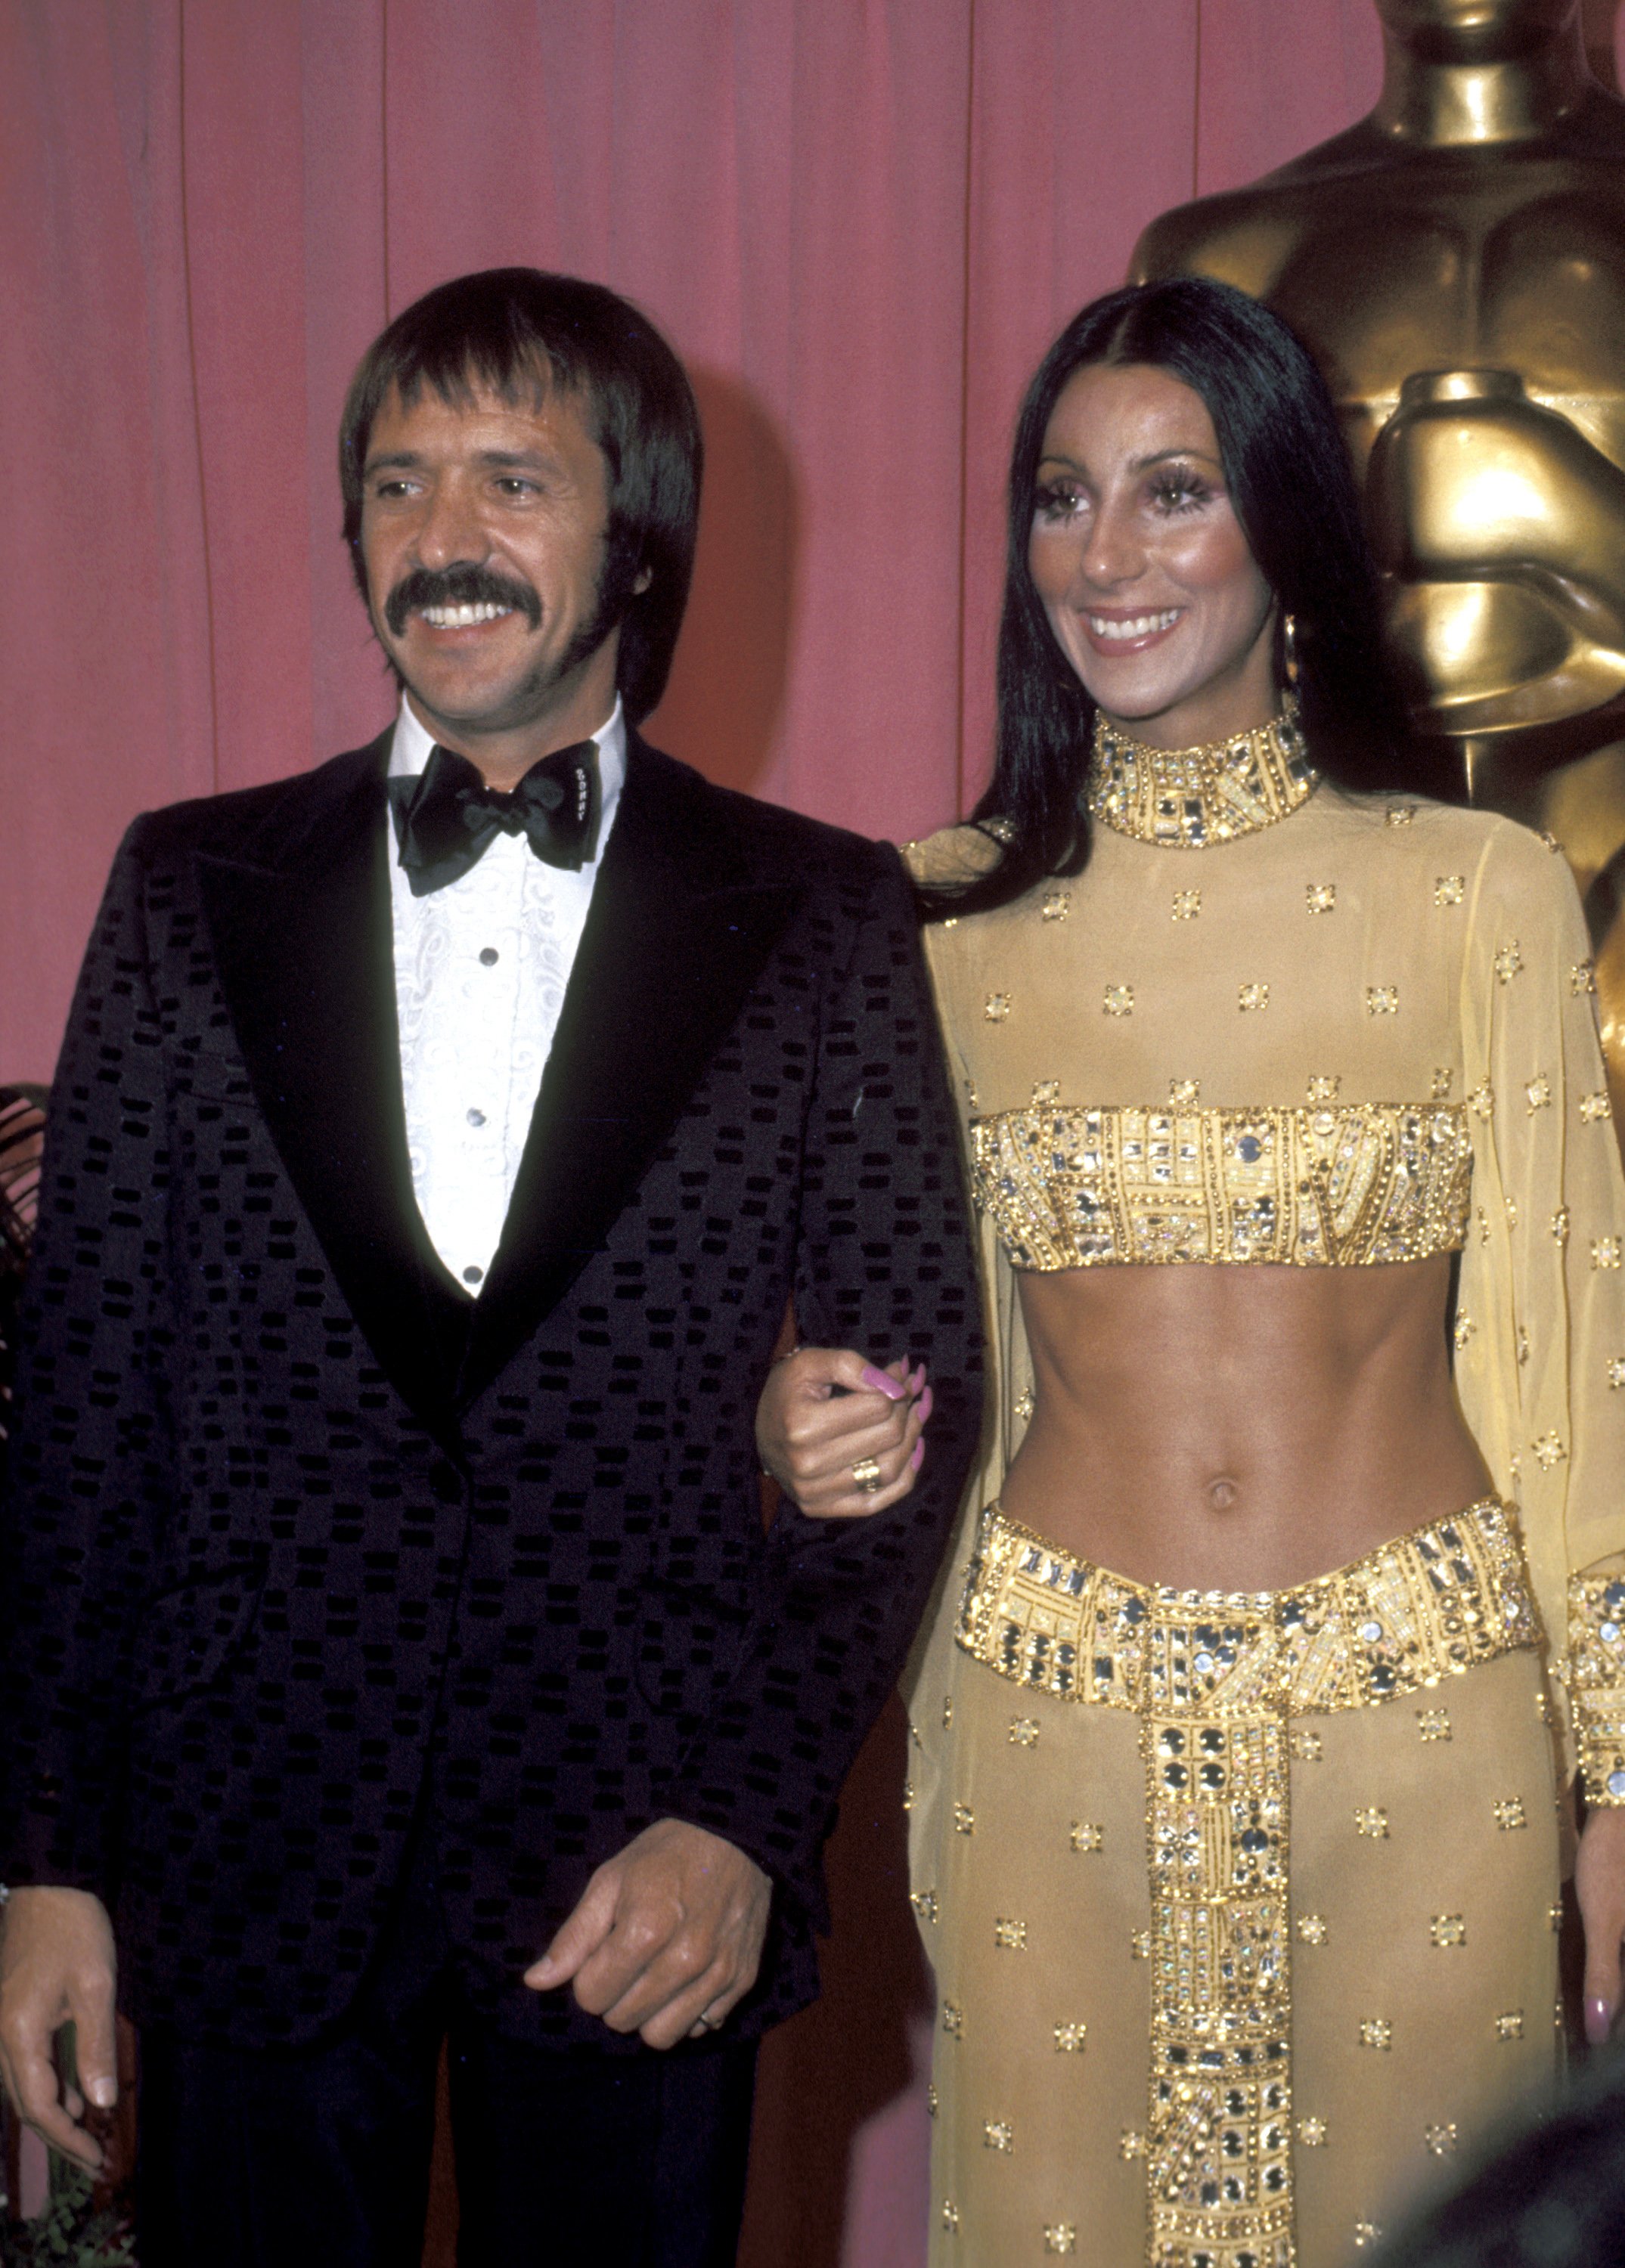 Singers Sonny Bono and Cher at the 45th Annual Academy Awards in March 1973 |  Source: Getty Images